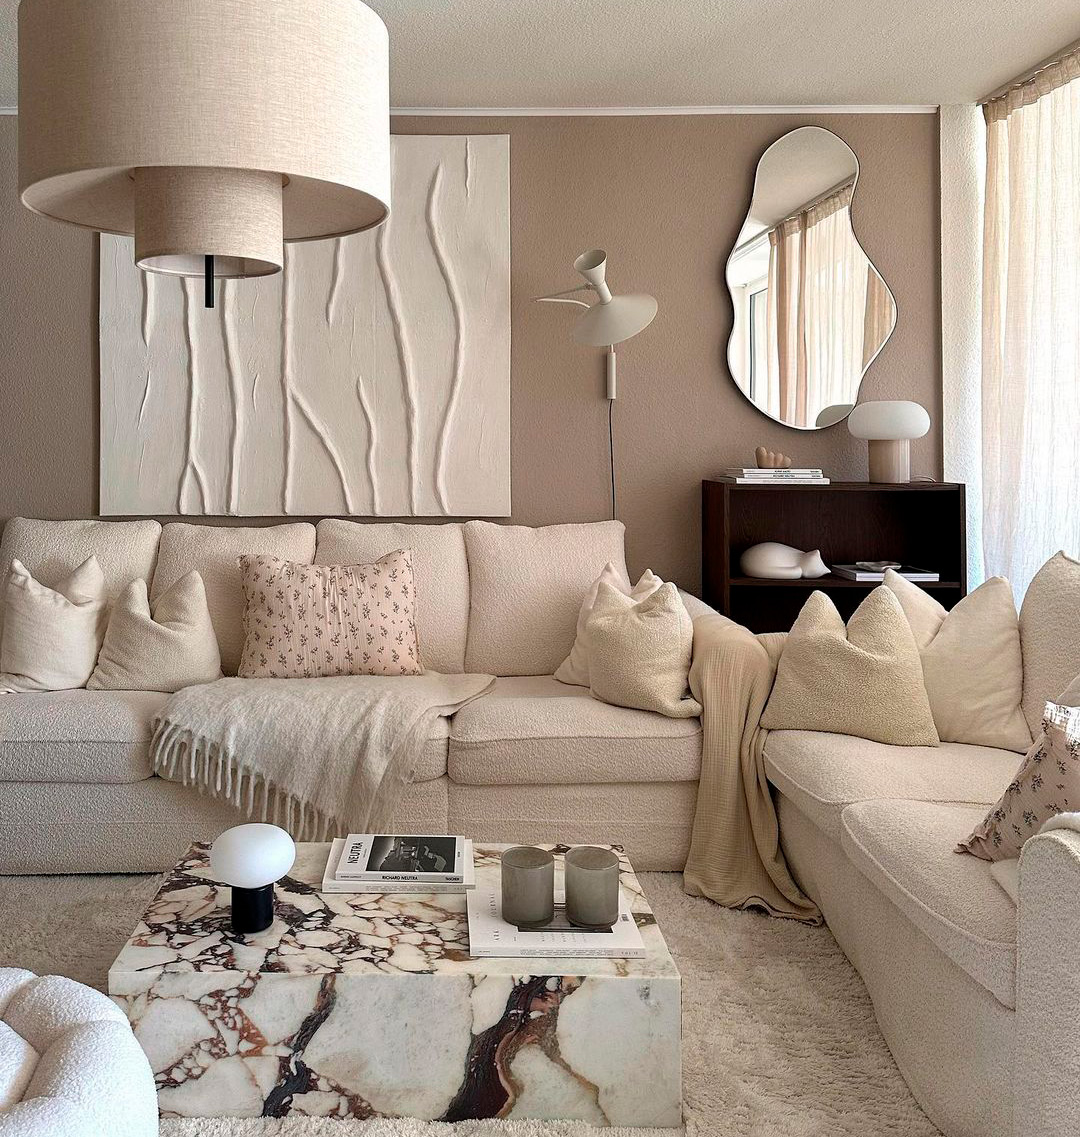 big beige sofa in the middle of the room in taupe colors